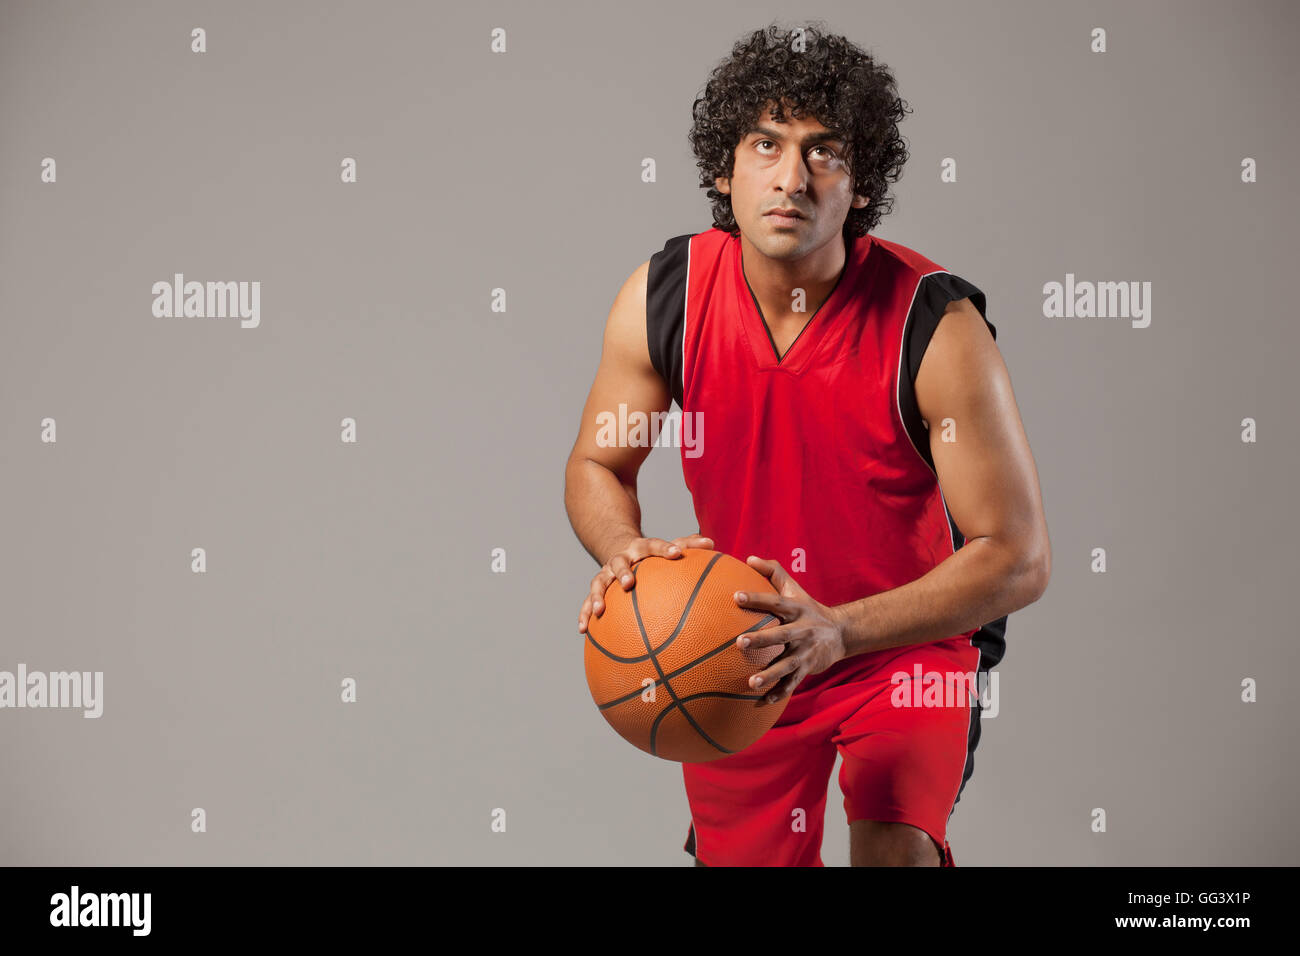 Basketball player lining up shot over grey background Stock Photo